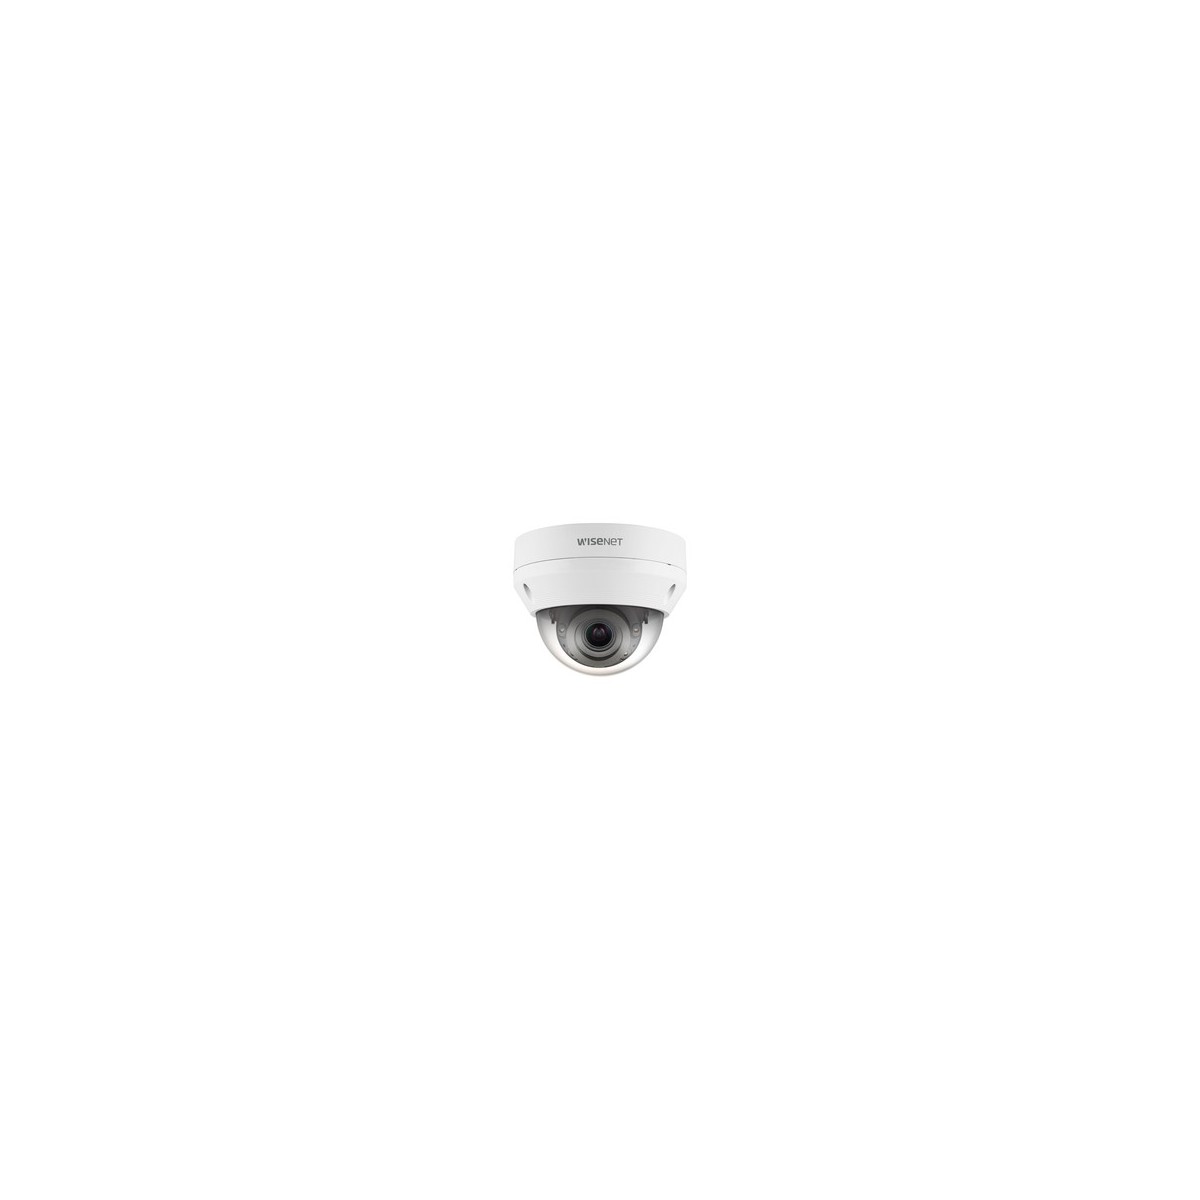 Hanwha Techwin Hanwha QNV-6082R1 - IP security camera - Indoor  outdoor - Wired - 120 dB - Ceiling - White